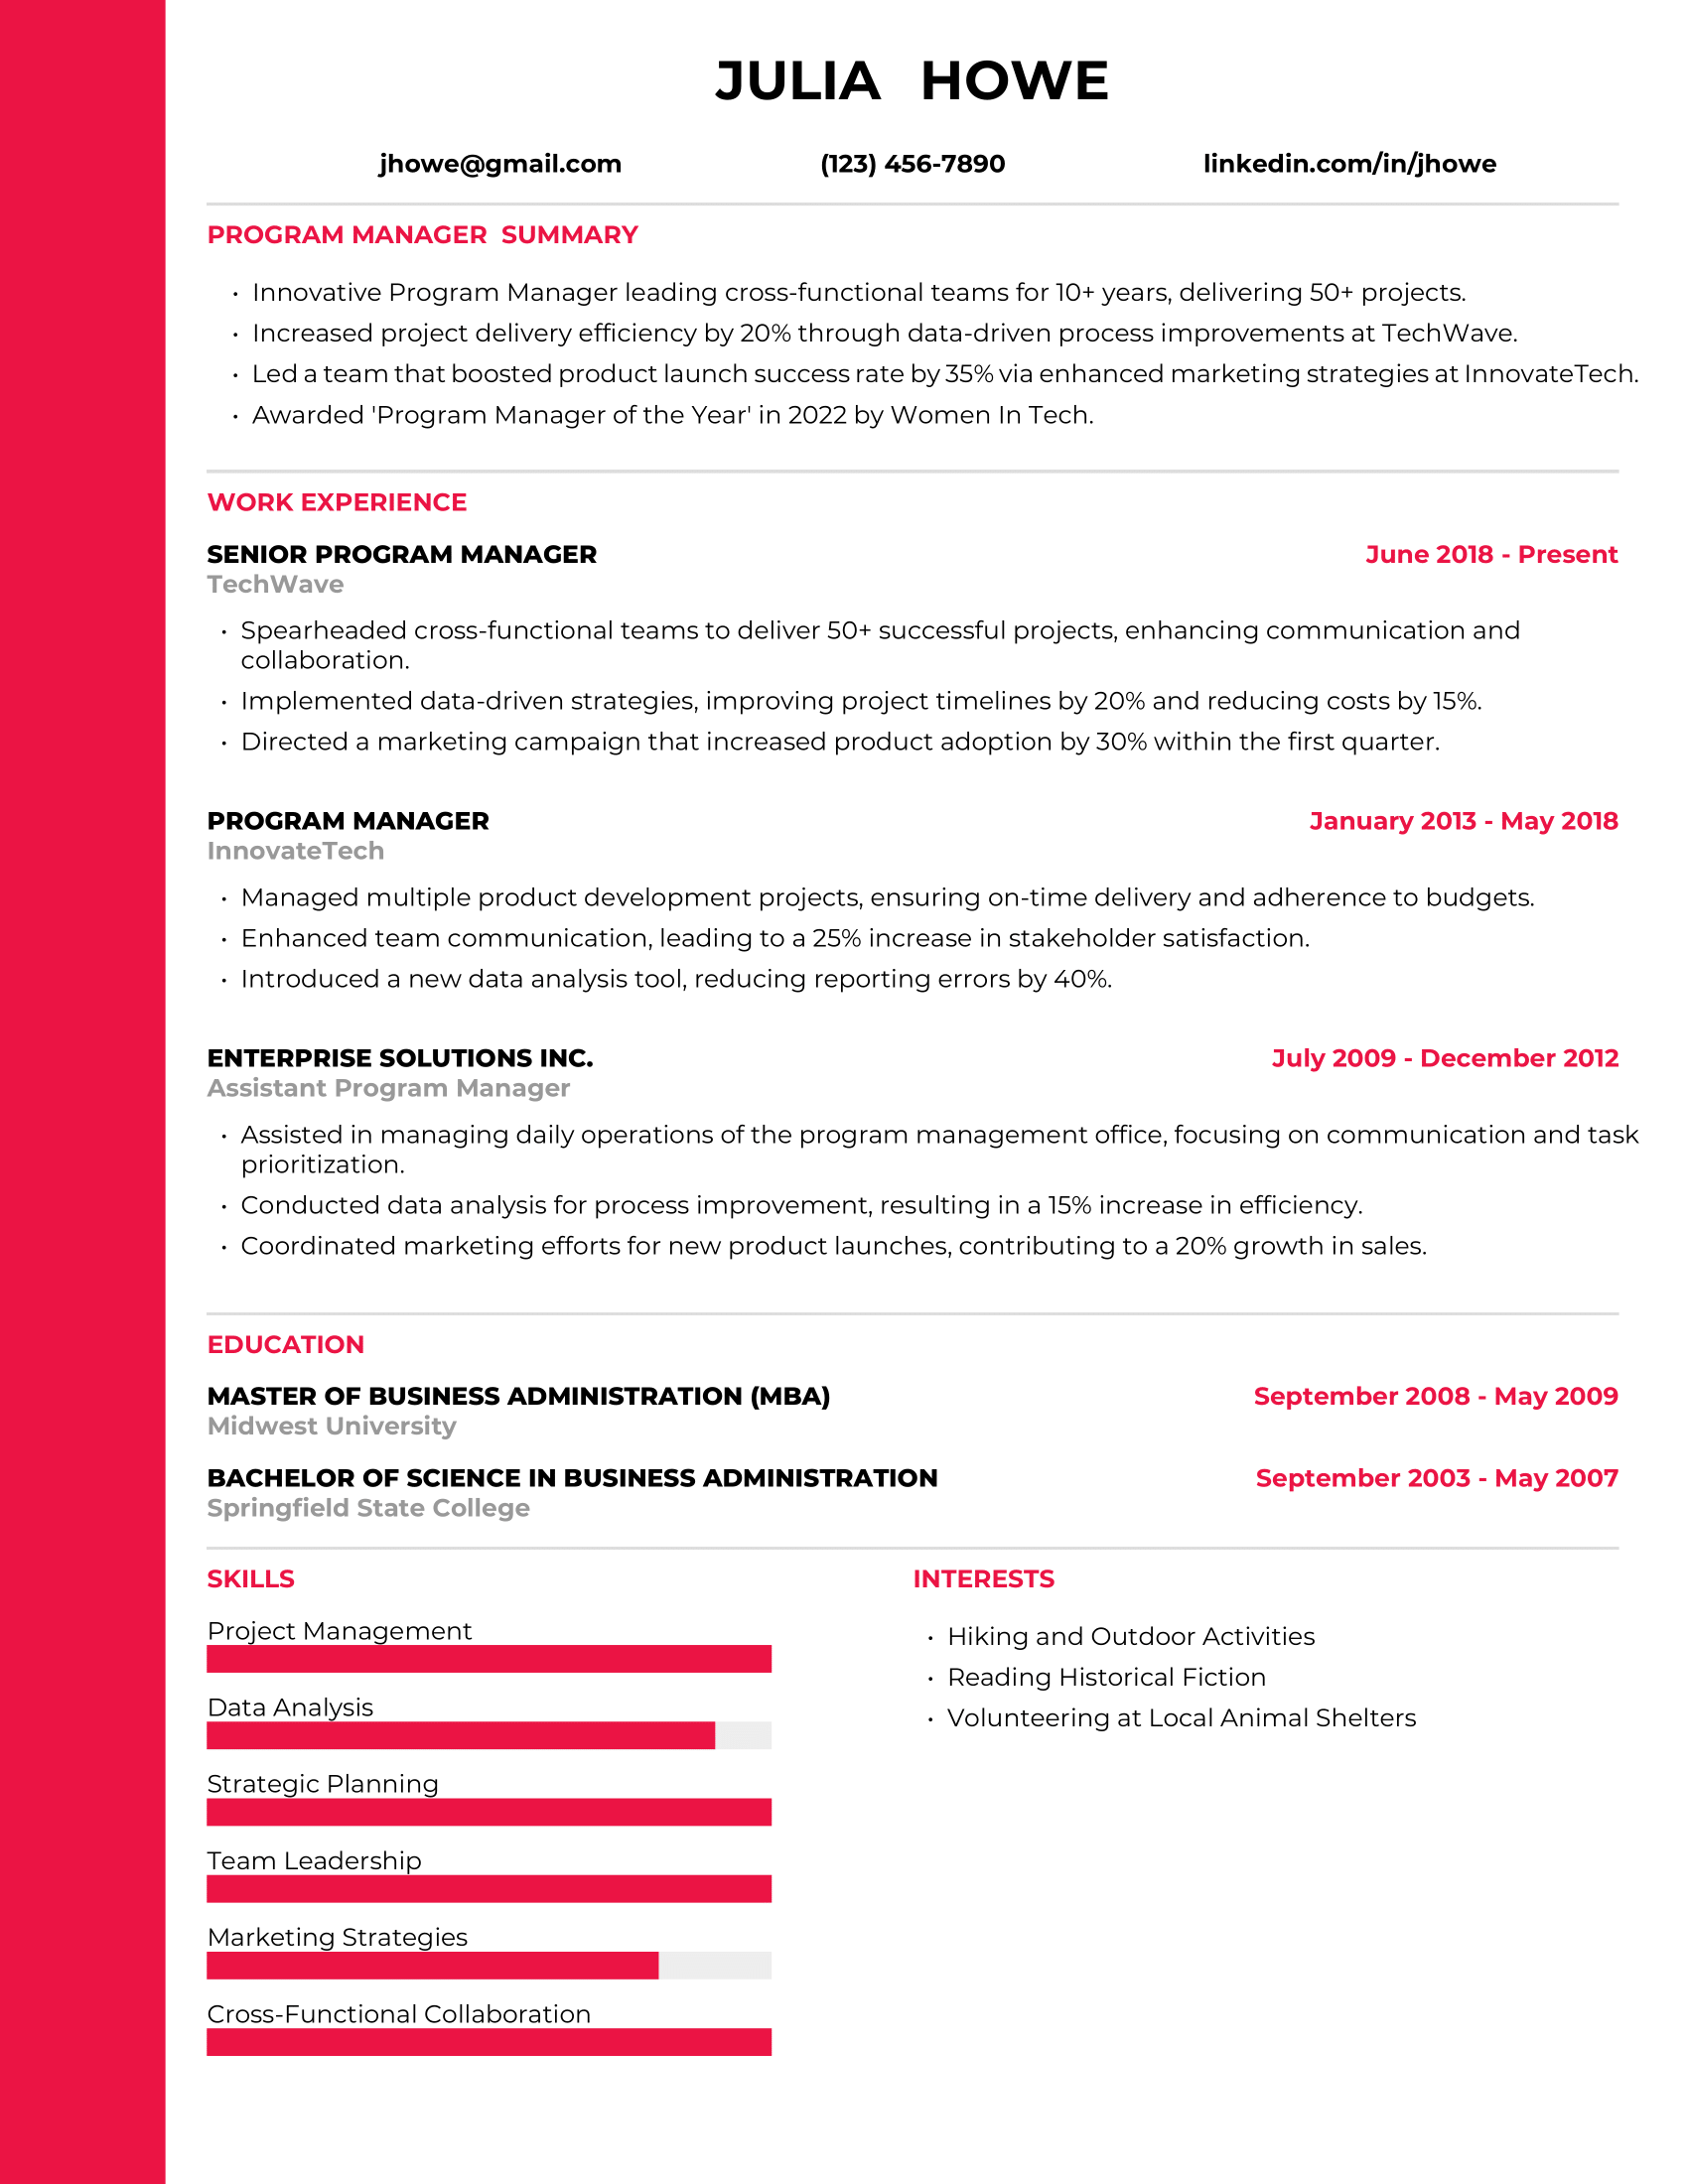 Program Manager Resume Example #1 - Traditional Background